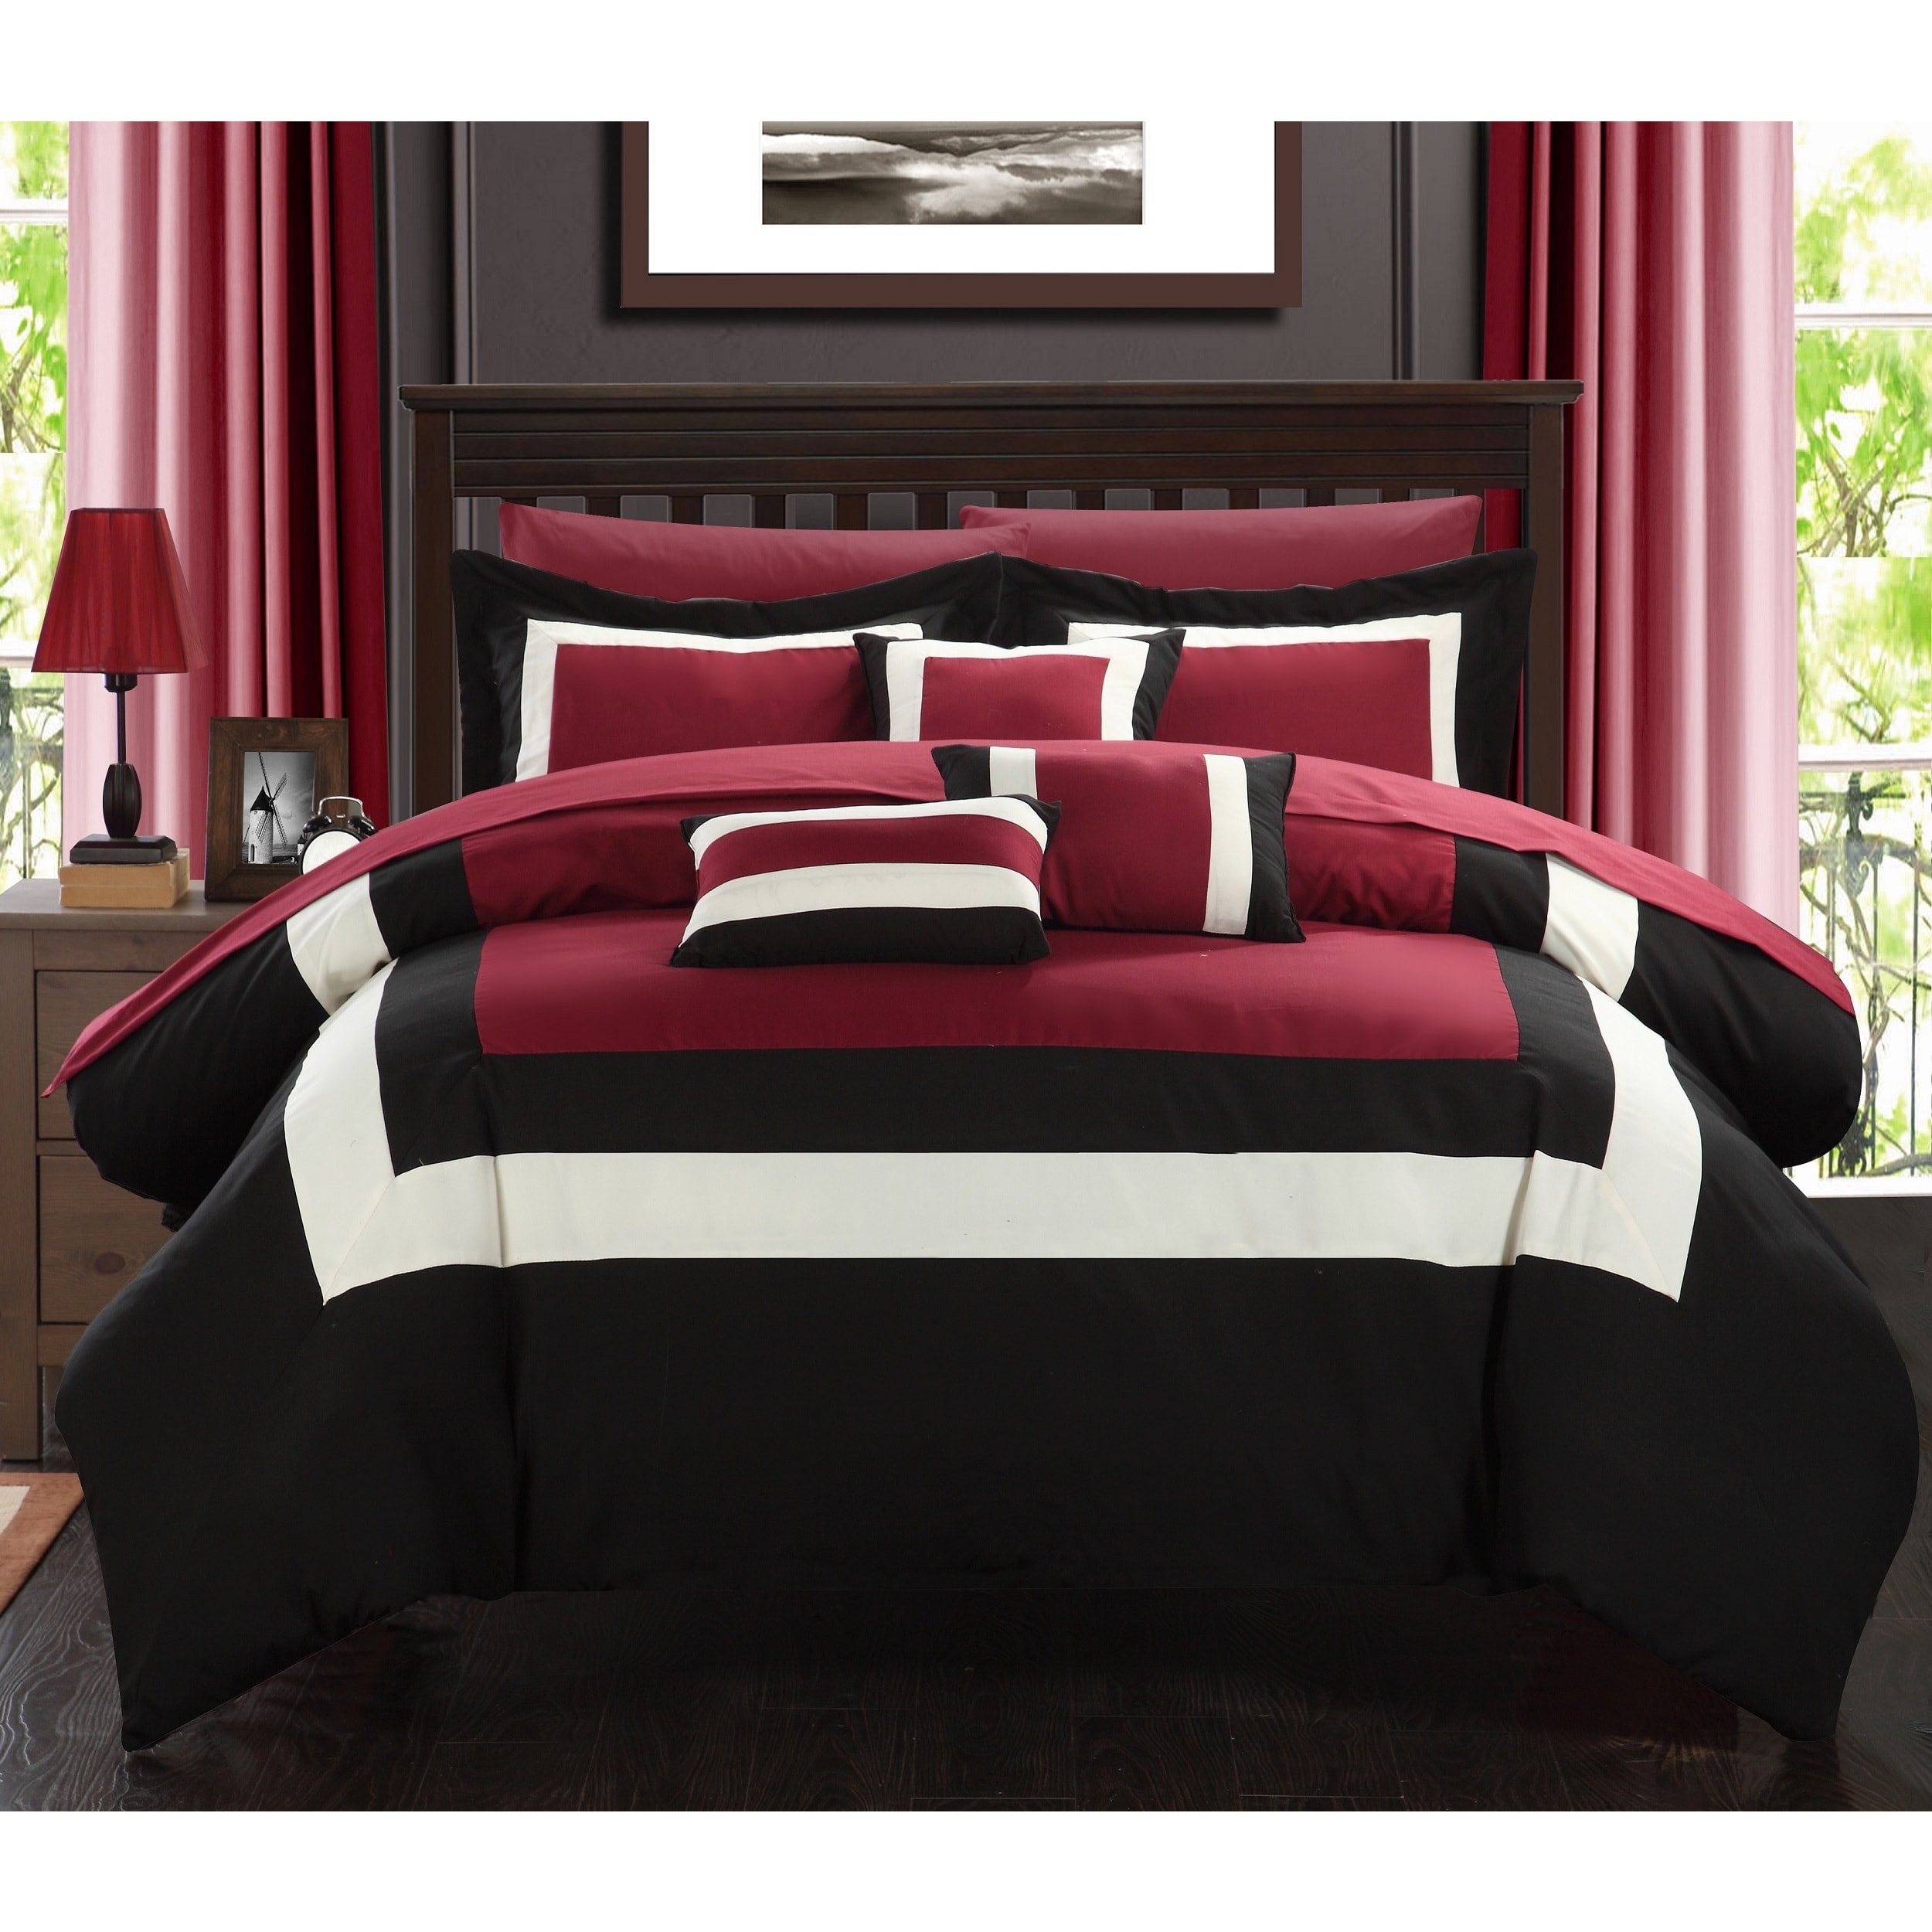 Shop Copper Grove Minesing Red White Black 10 Piece Bed In A Bag